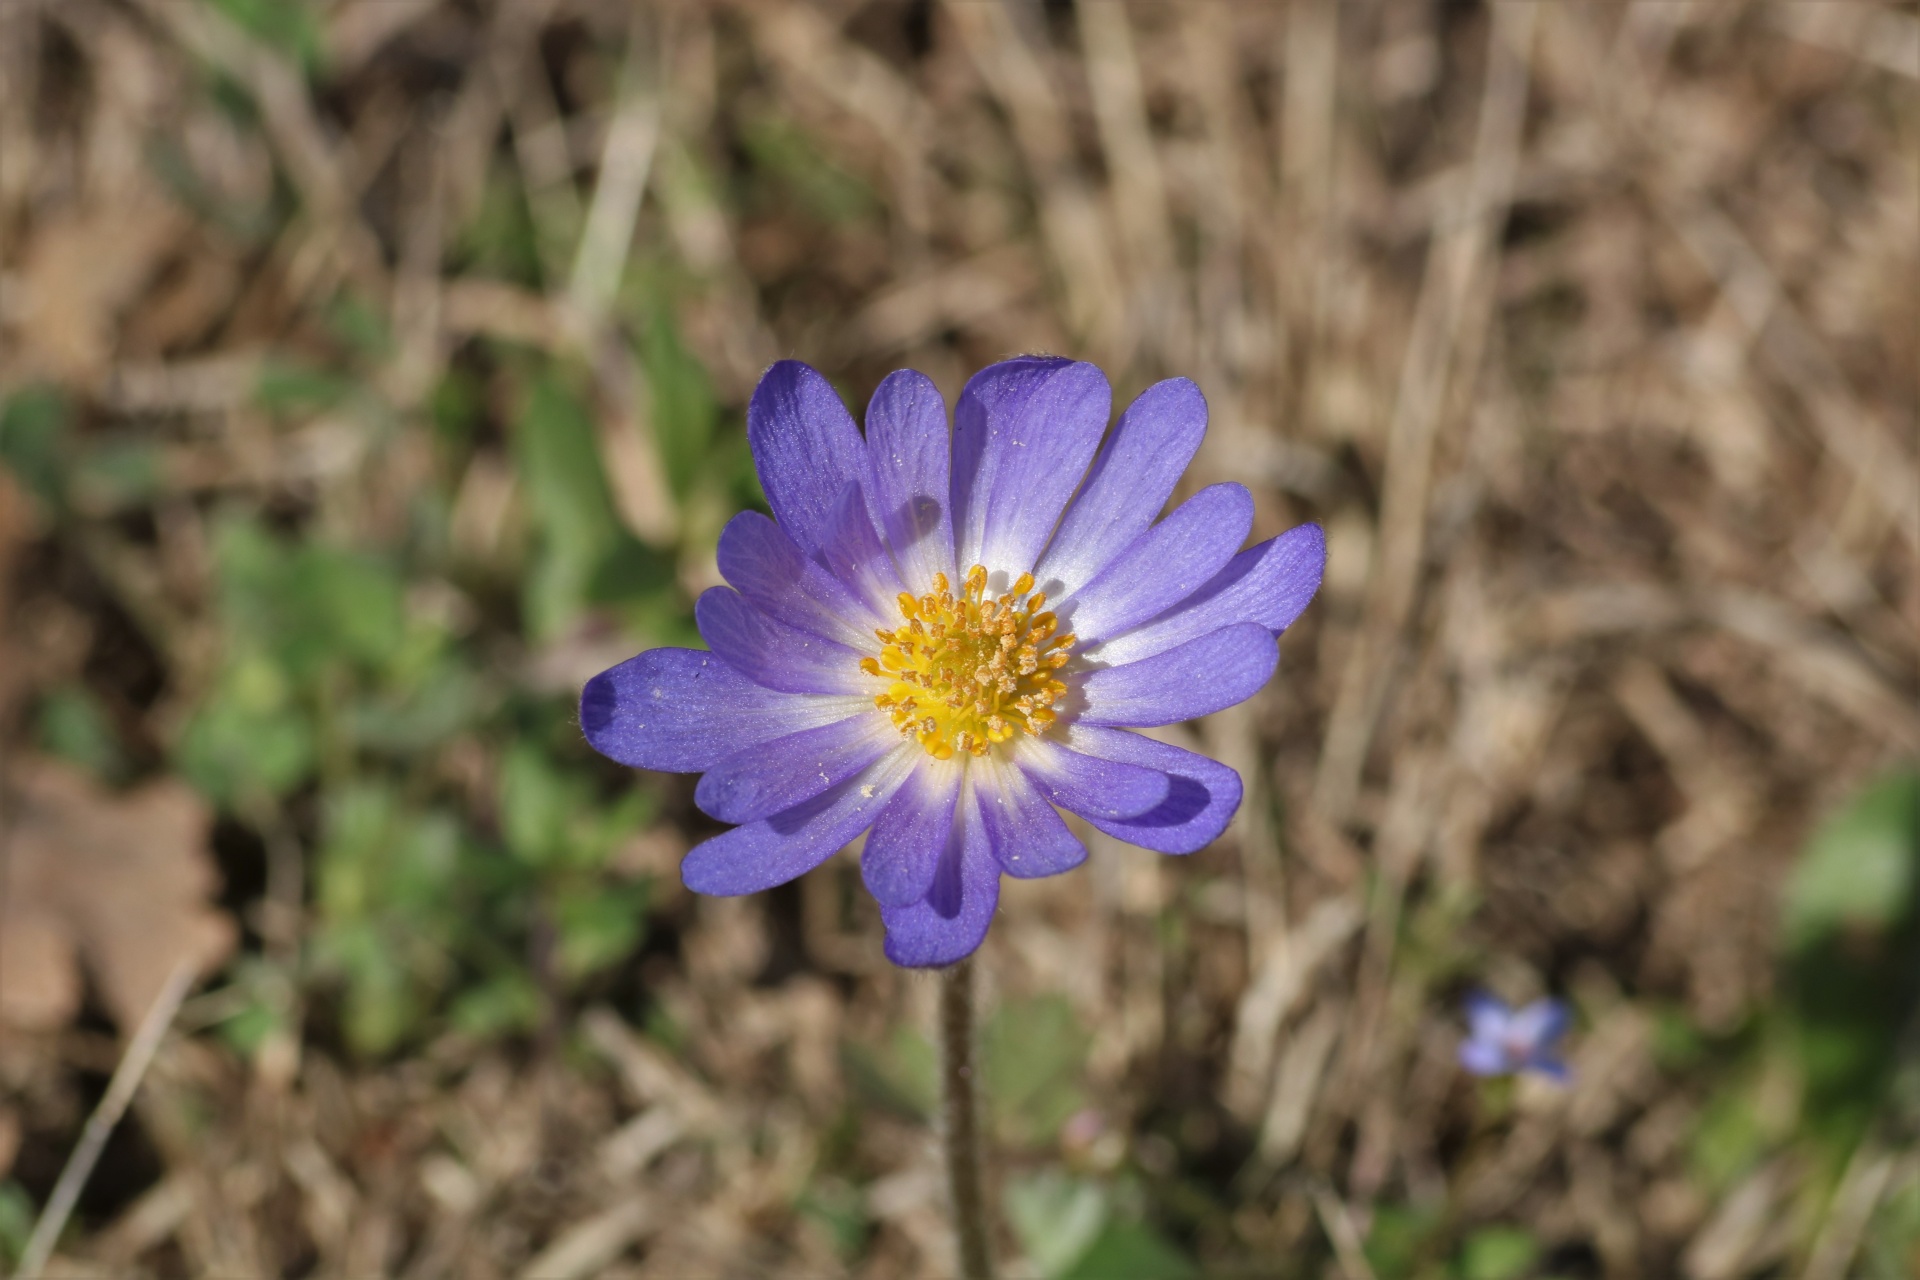 A purple Carolina anemone wildflower growing in an Oklahoma country field in early spring.